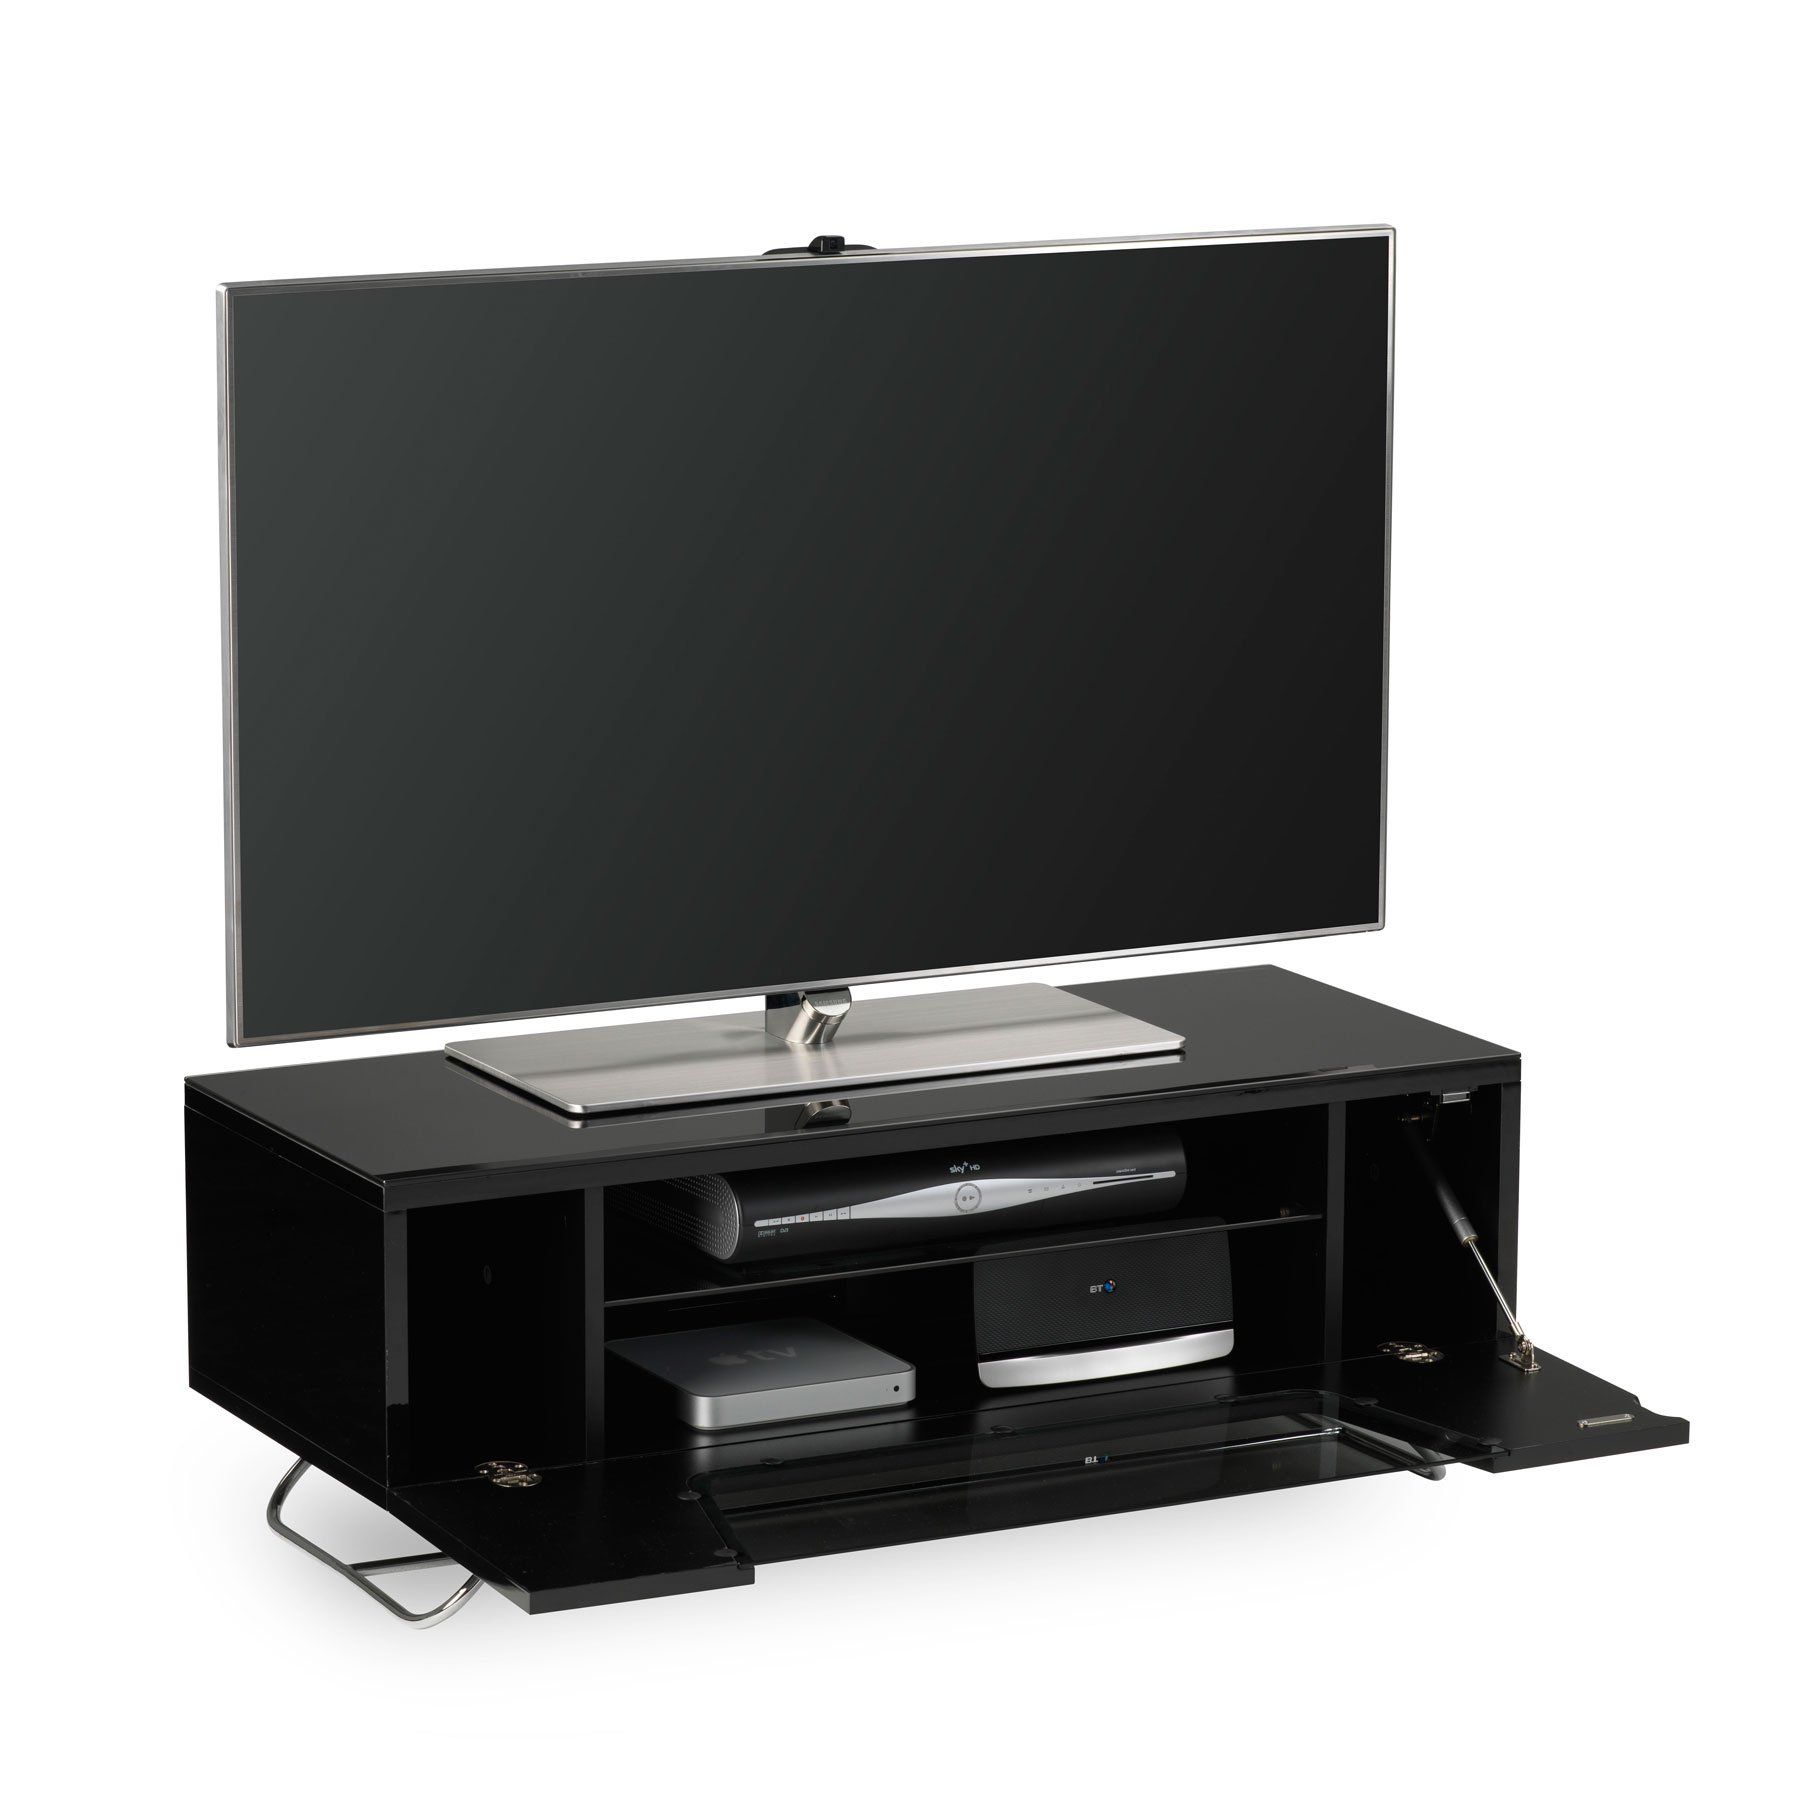 Alphason Chromium 2 100cm Black Tv Stand For Up To 50" Tvs Throughout Caleah Tv Stands For Tvs Up To 50&quot; (View 12 of 15)